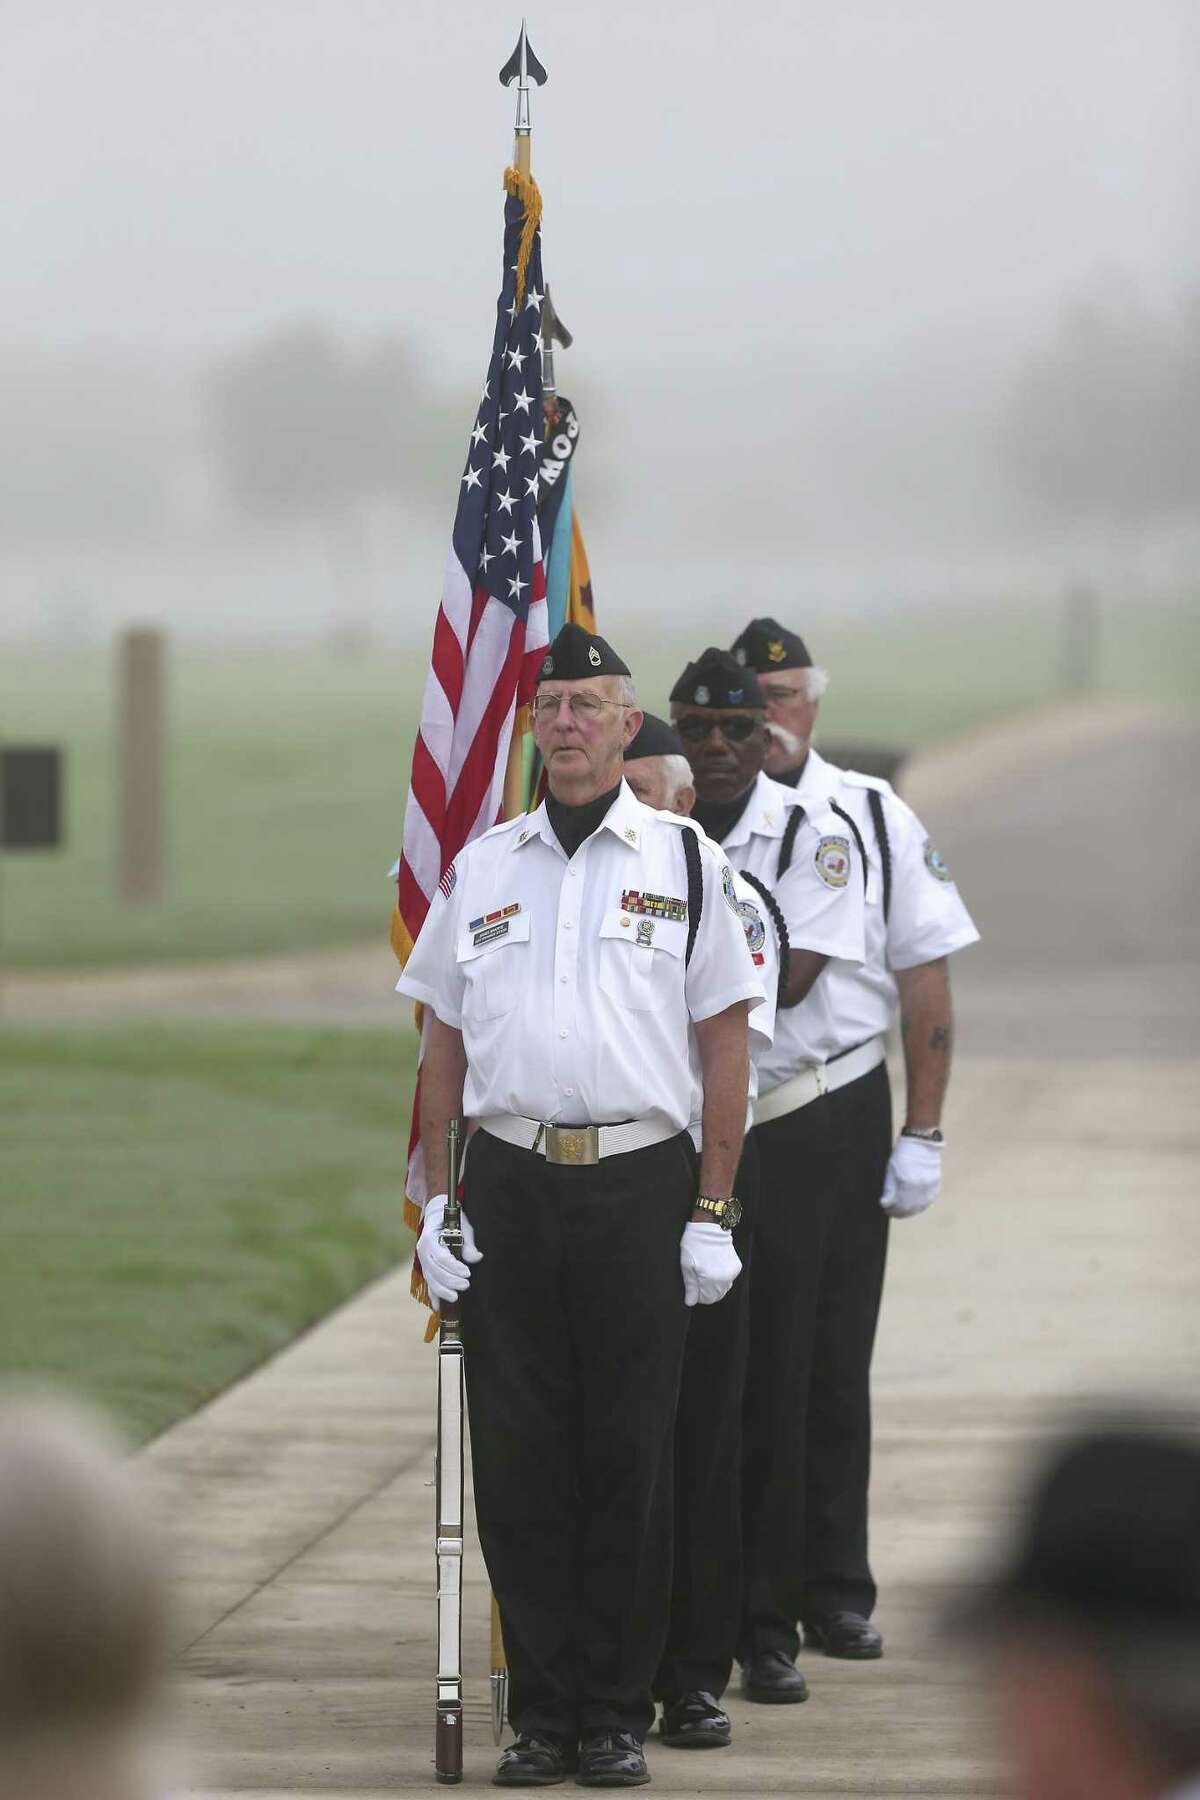 The color guard prepares to present the colors Wednesday, March 29, 2017 at Fort Sam Houston National Cemetery during a commemorative ceremony for Vietnam War veterans. April 30th marks the 42 anniversary of the last Americans being evacuated from the U.S. embassy in Saigon and the fall of the city to communist forces.